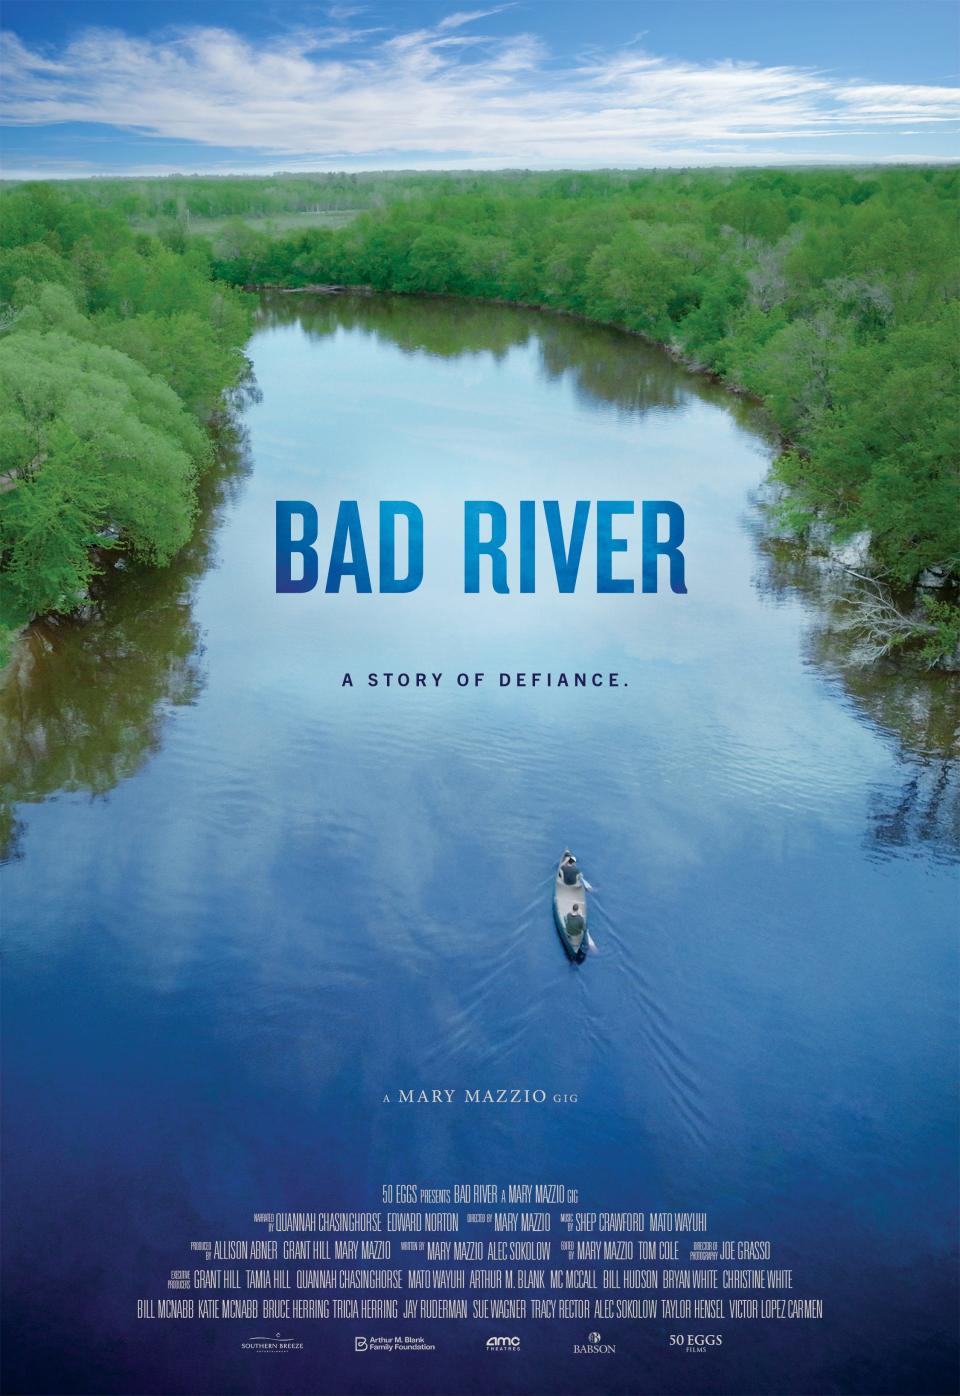 "Bad River" is a new documentary that highlights the Bad River Band of Lake Superior Chippewa's efforts to protect the land and water.